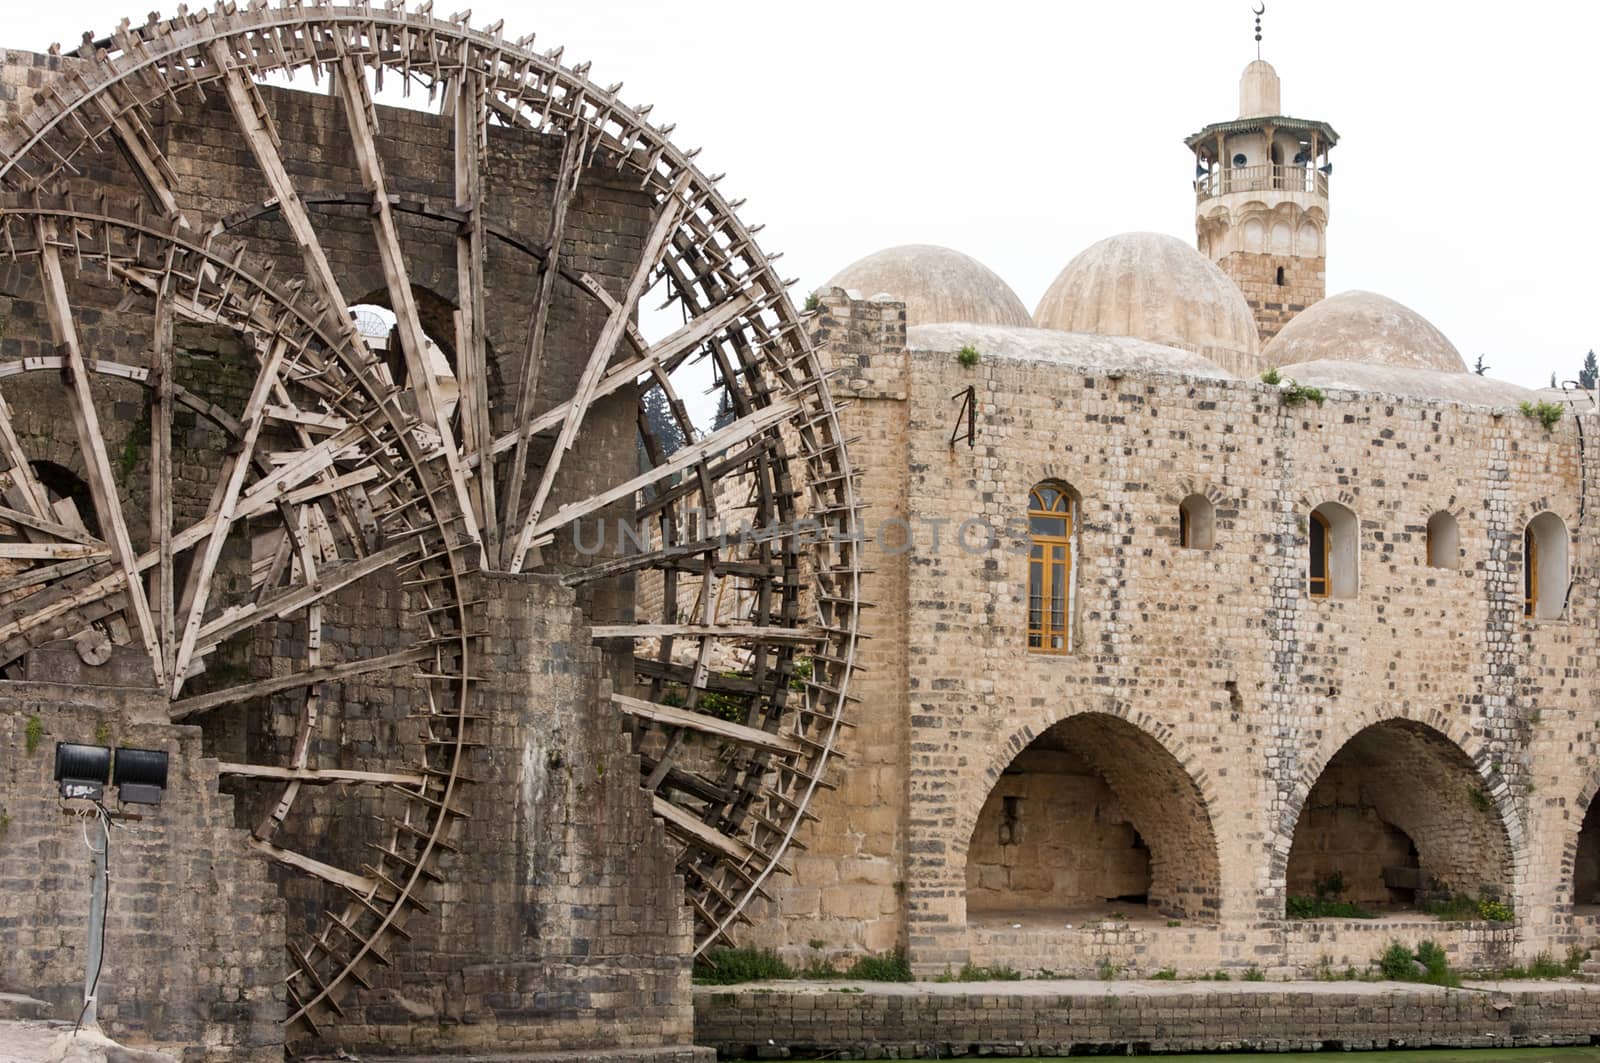 The Norias of Hama, Syria are ancient hydropowered machines used to lift water into a small aqueduct, along the Orontes River in the city of Hama, They are unique not only to Syria but probably the worldwide